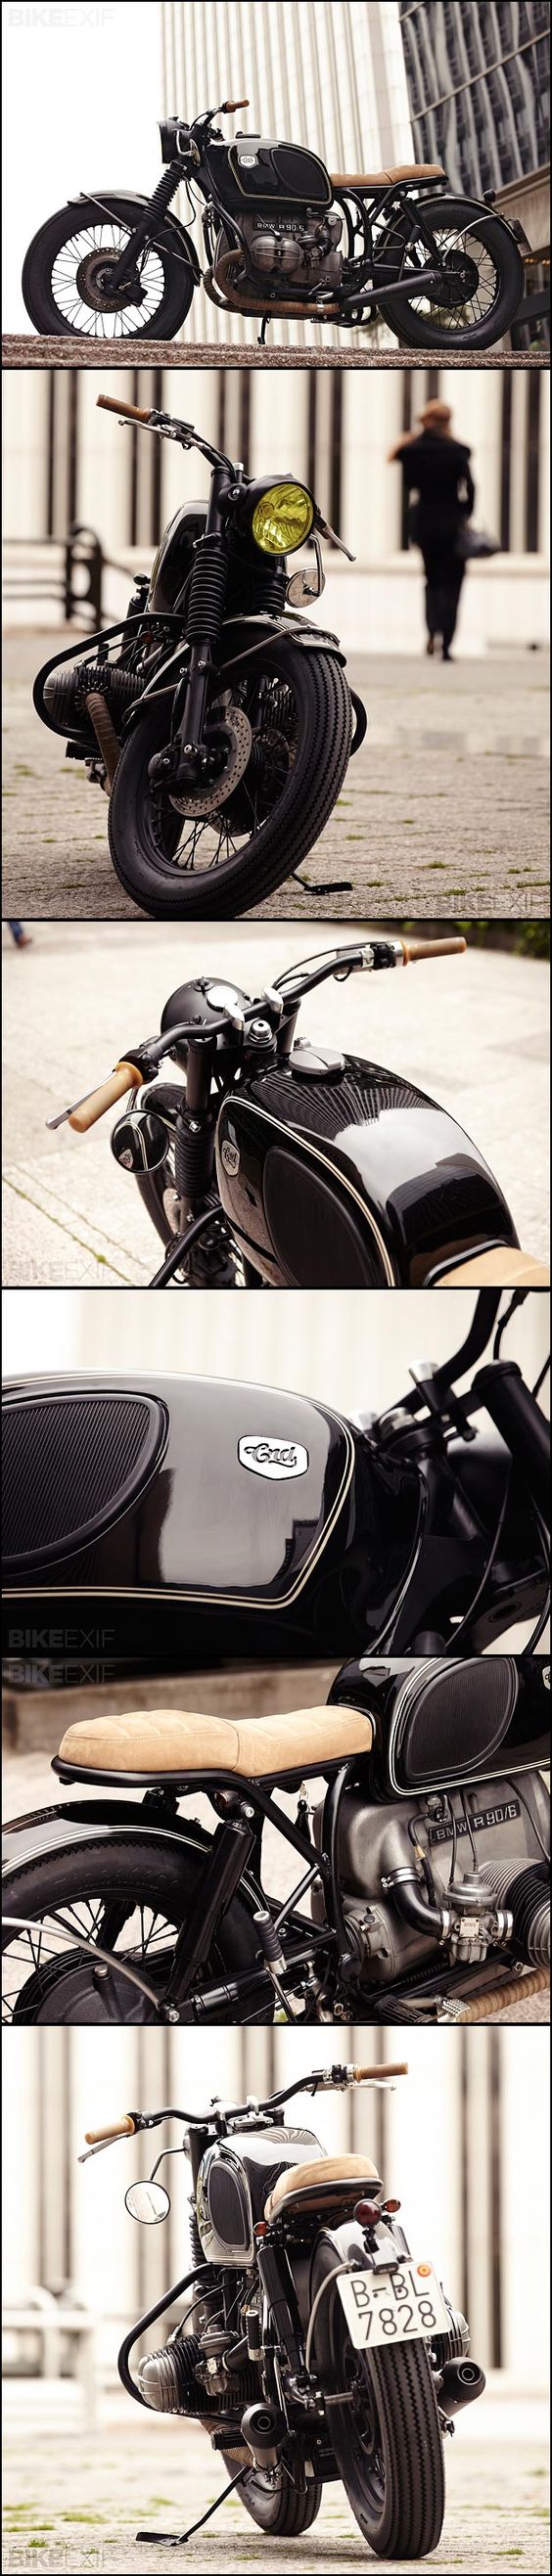 Cafe Racer Dreams BMW R90/6 #bratstyle #custom (only a man with finesse can harness such power)